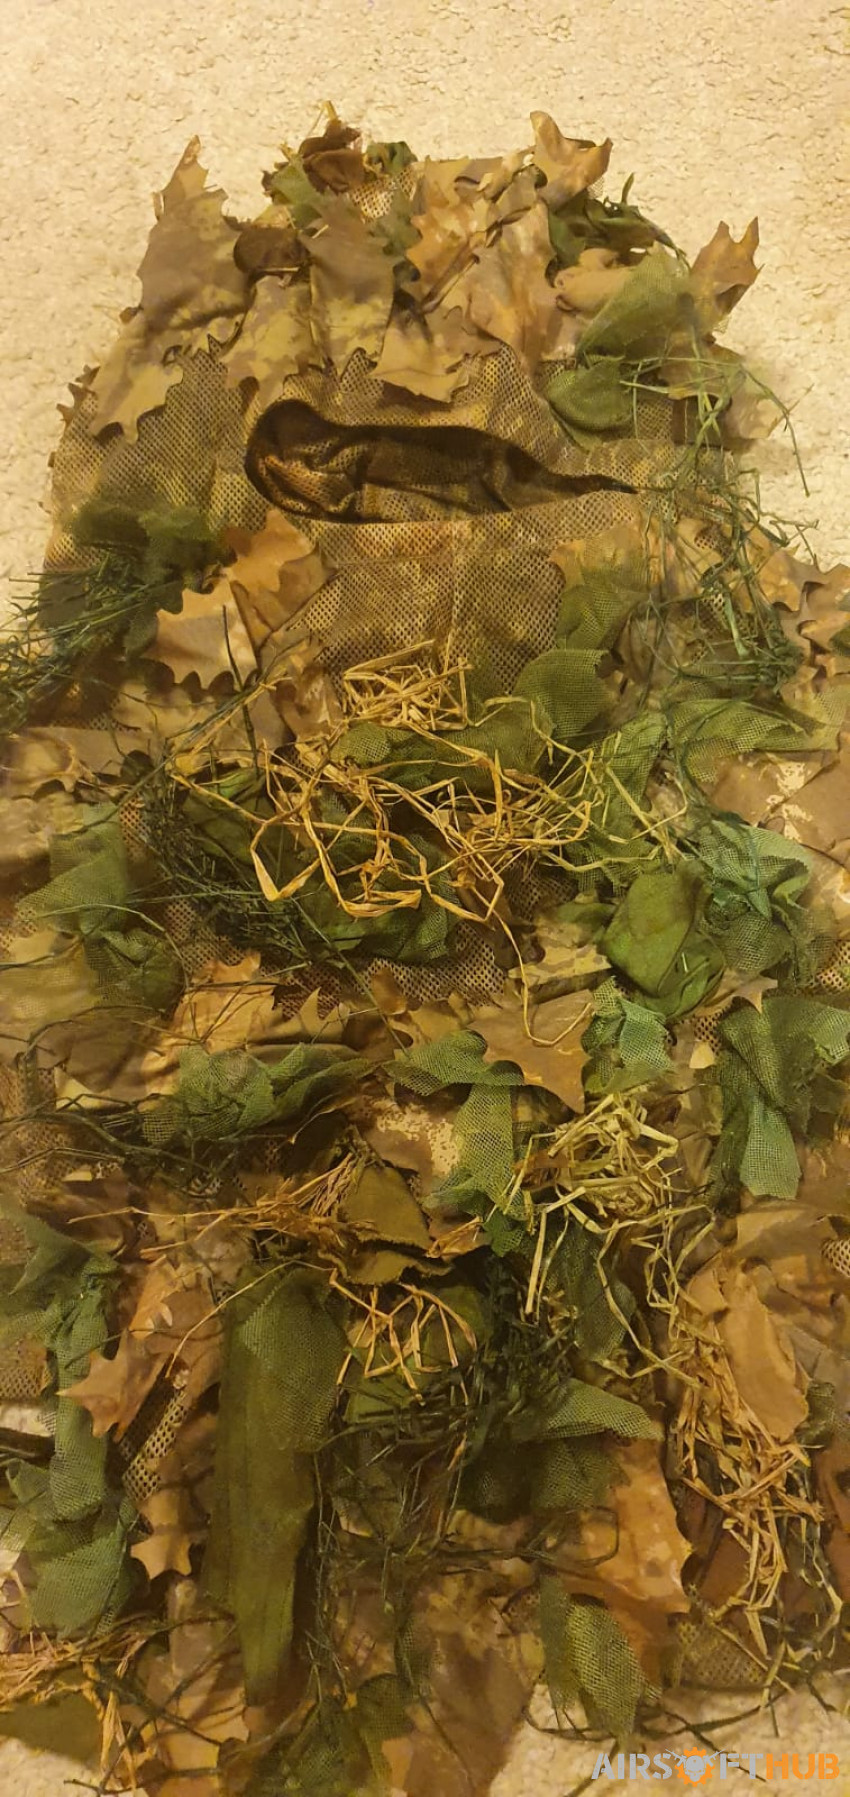 Ghillie loadout - Used airsoft equipment